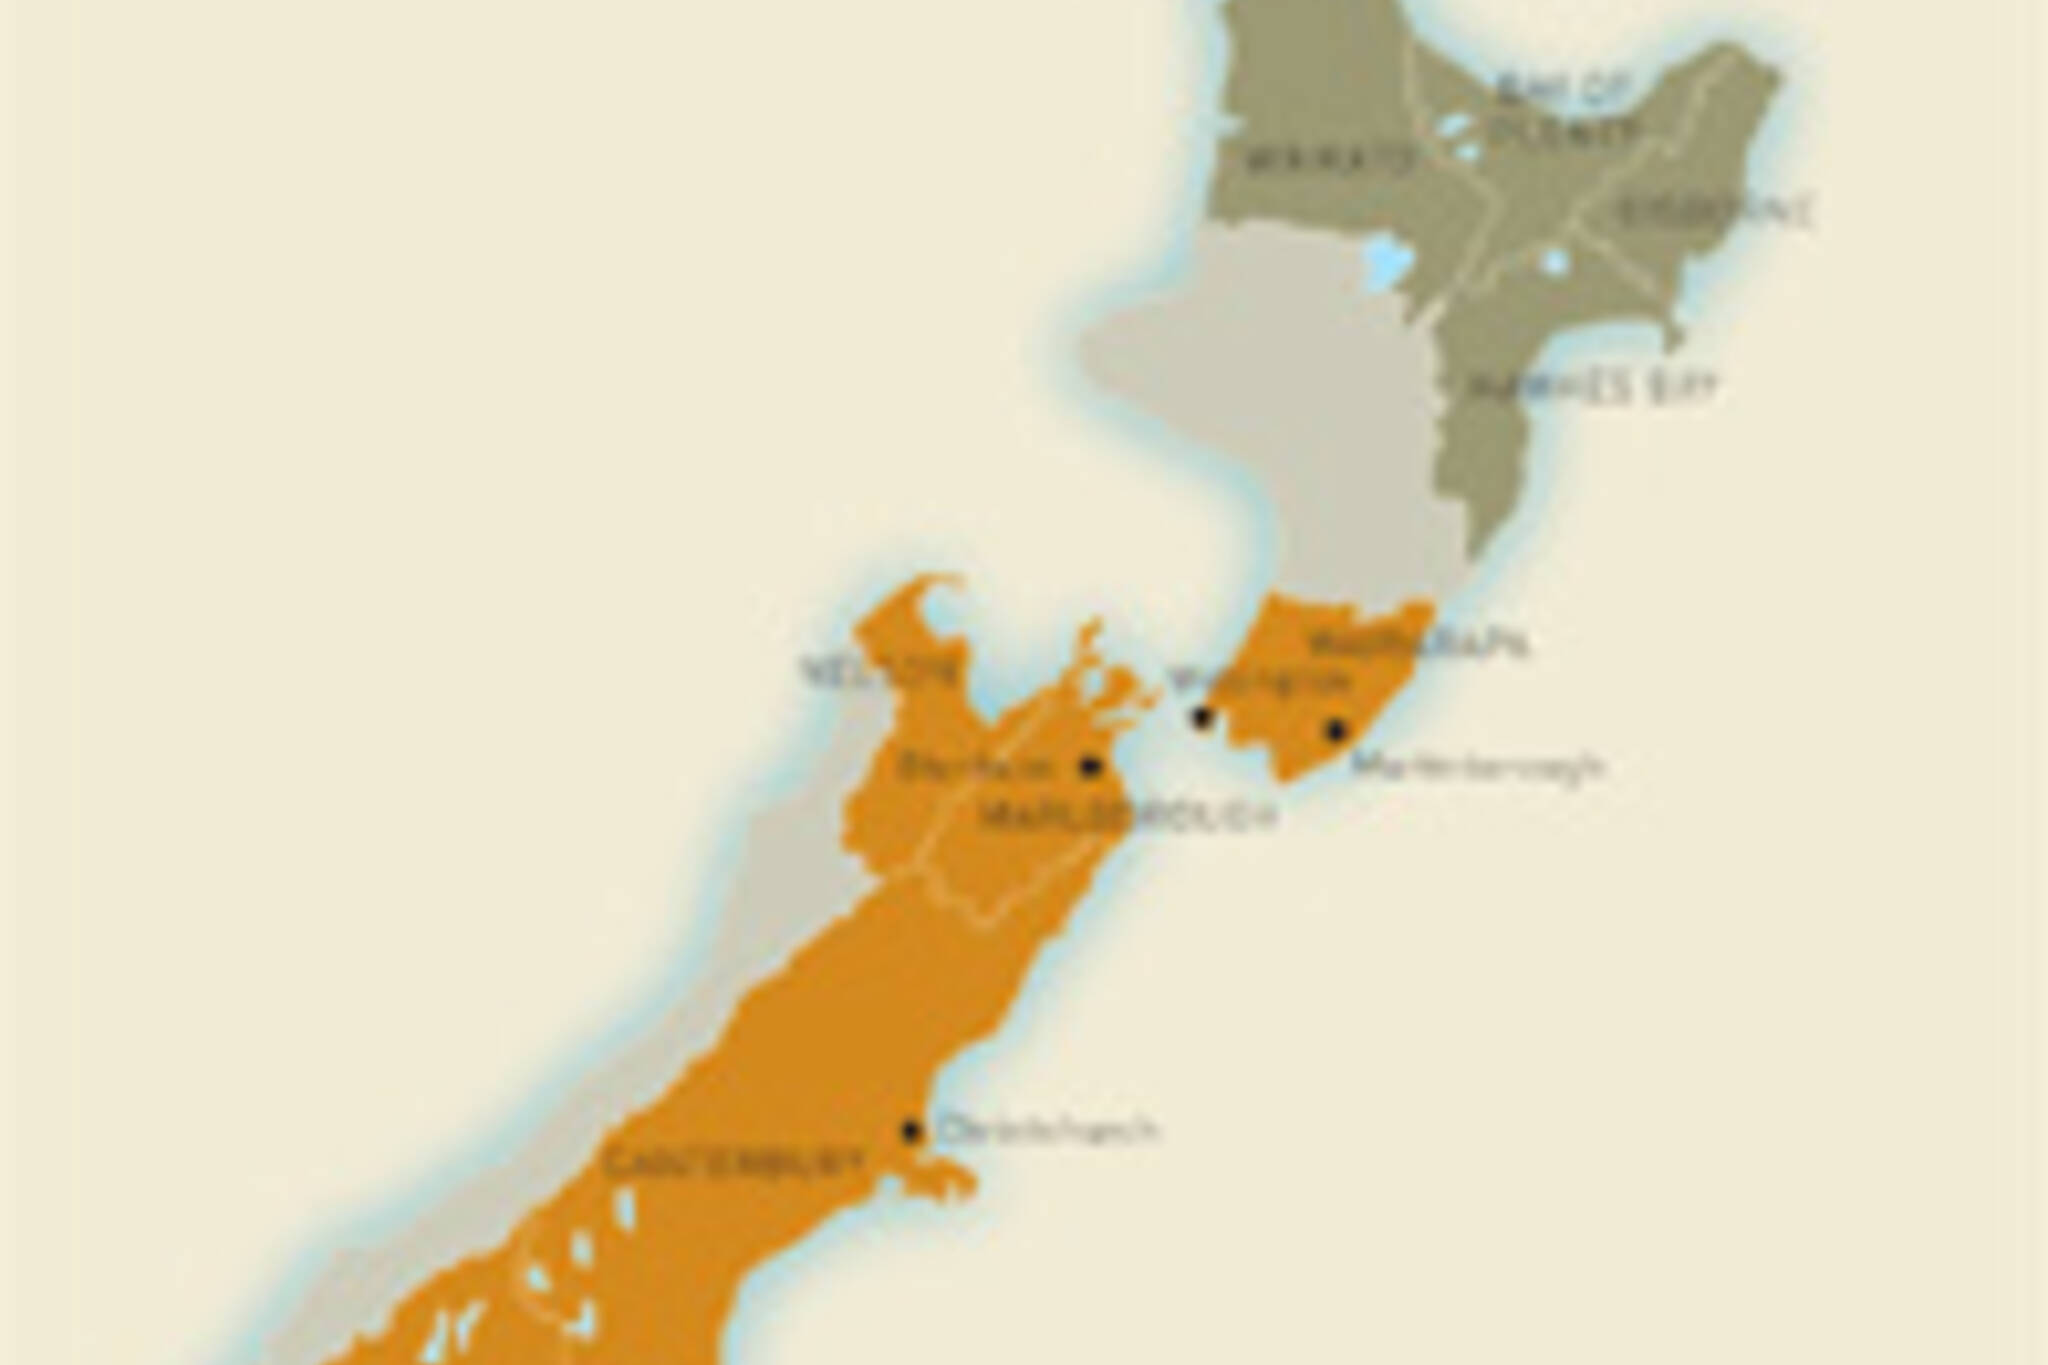 The wine regions of New Zealand.  Image from www.vintages.com